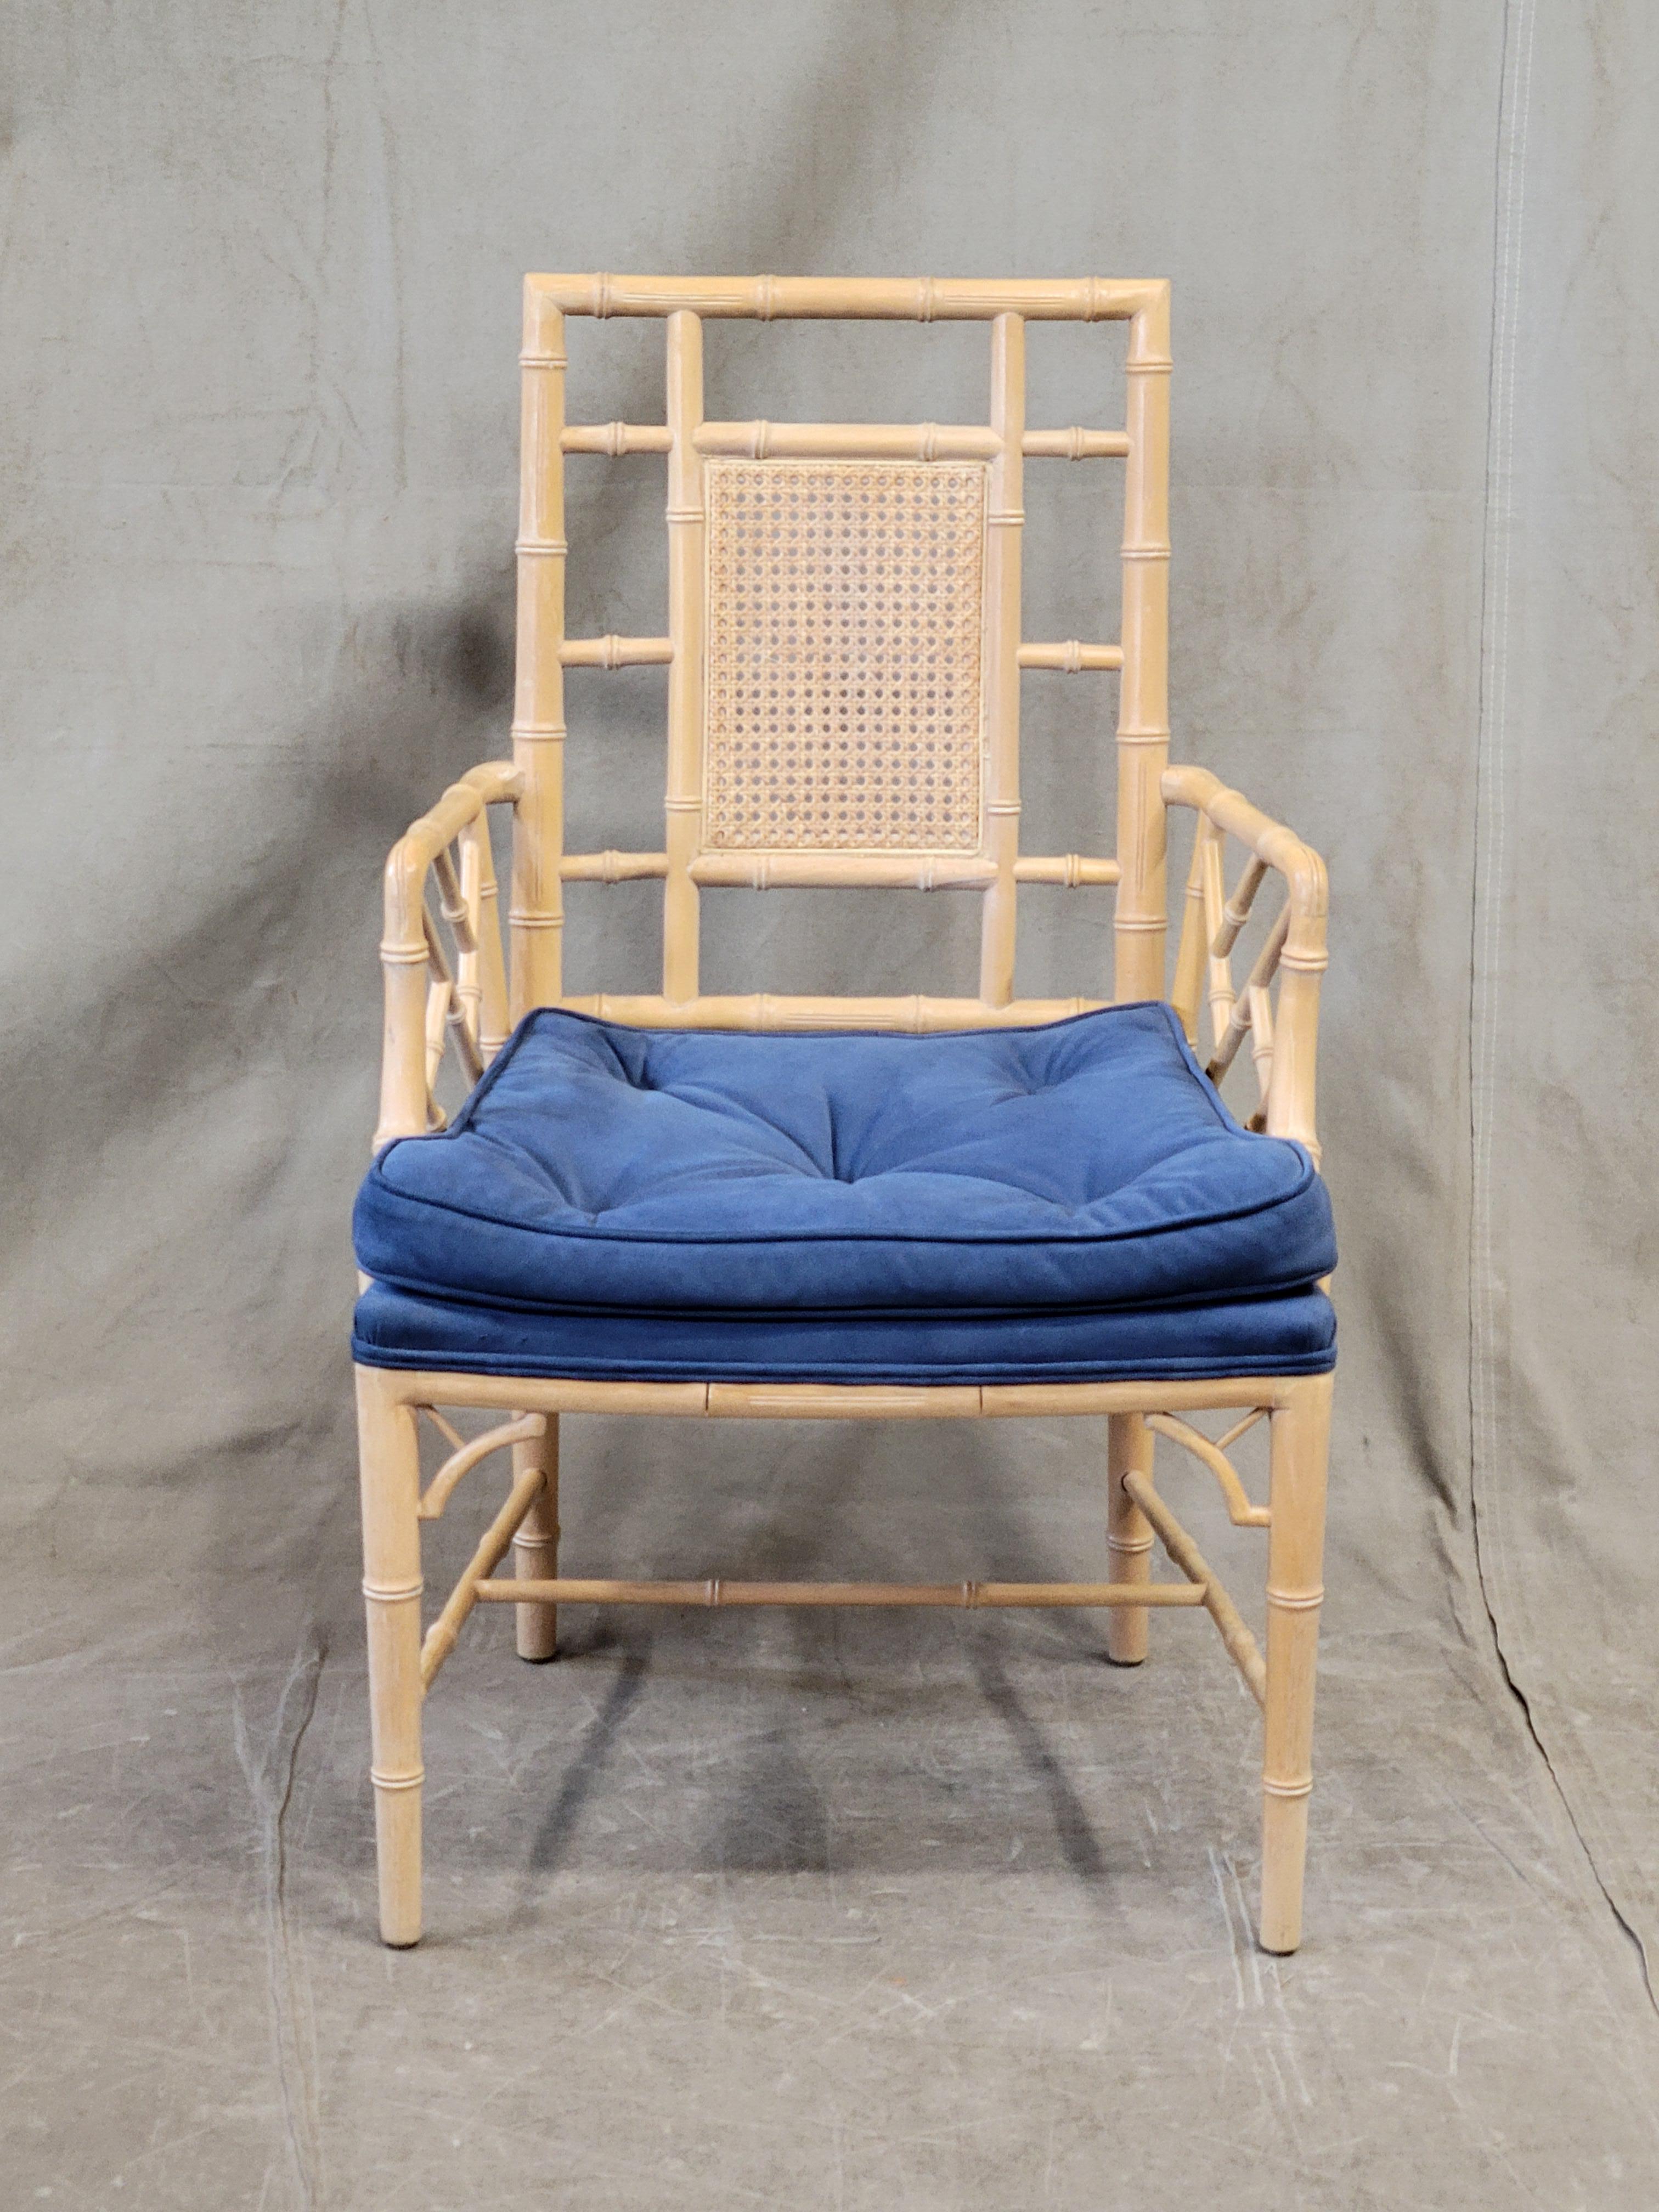 Late 20th Century Vintage Faux Bamboo Chairs With Blue Cushions - a Pair For Sale